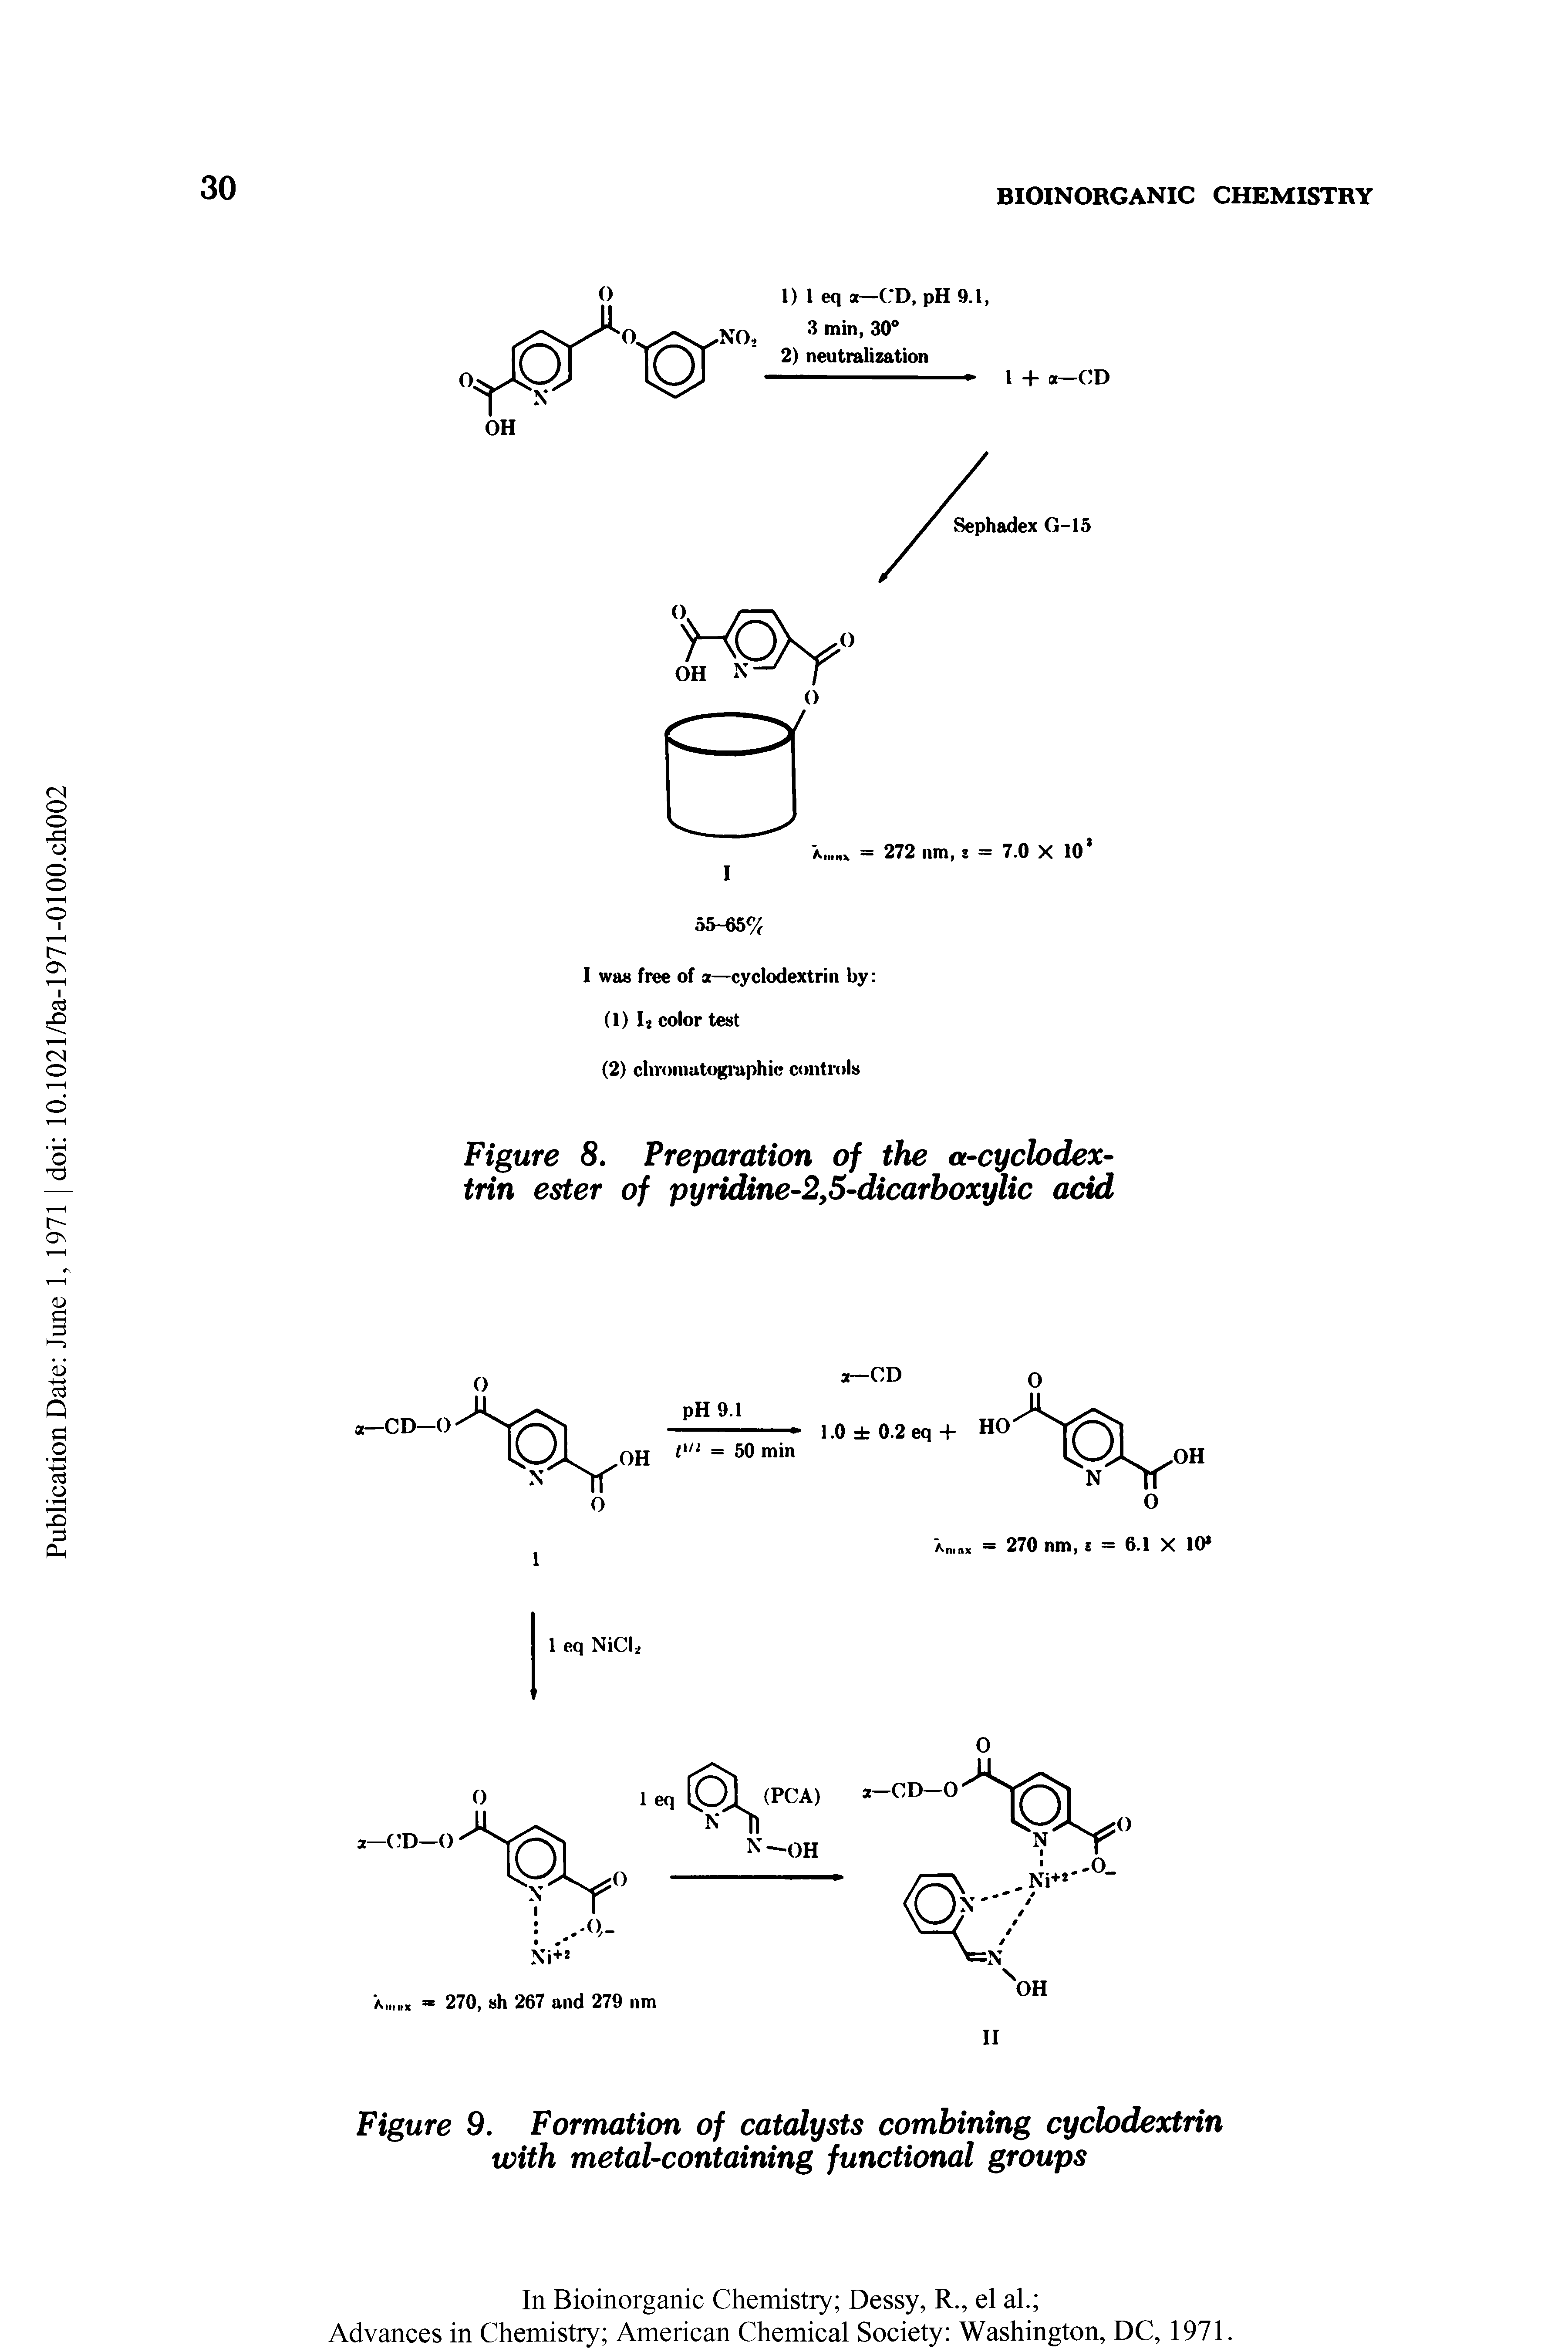 Figure 8. Preparation of the a-cyclodex-trin ester of pytidine-2,5-dicarboxylic add...